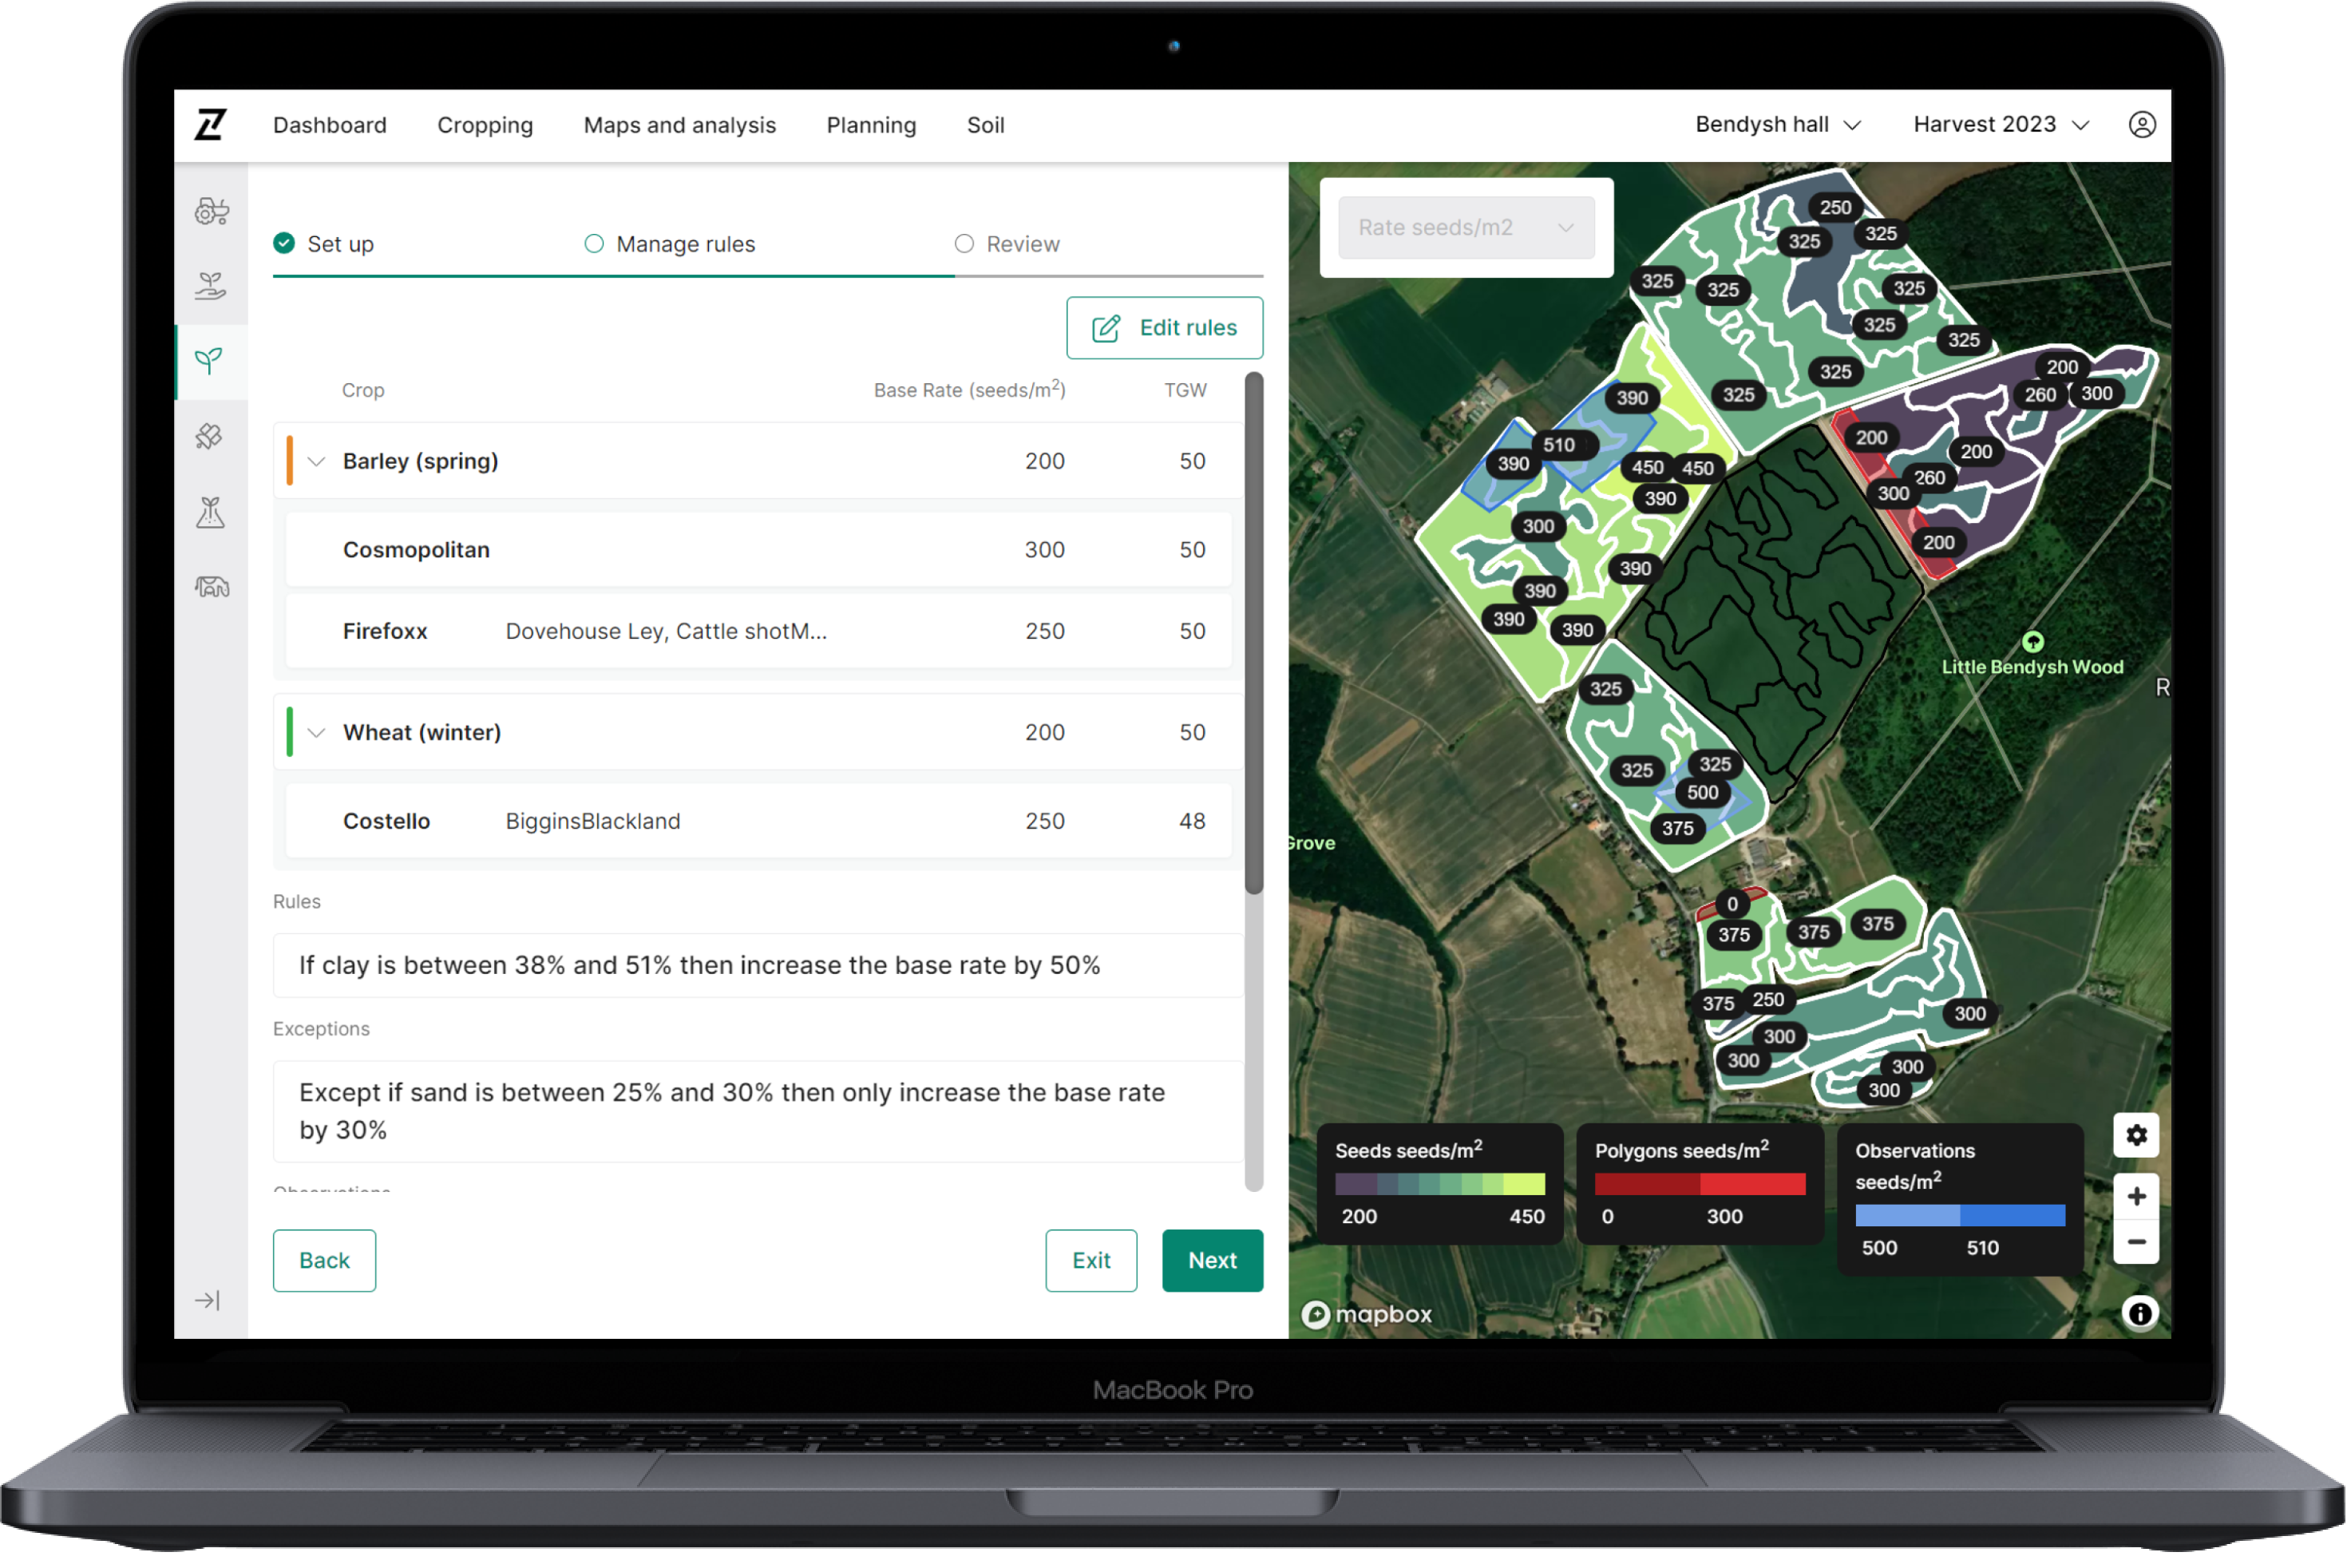 The new Contour Soil-Based Seed Planning tool is now available, adding further precision and control to seed planning in addition to all the features in Whole Field Seed Planning.